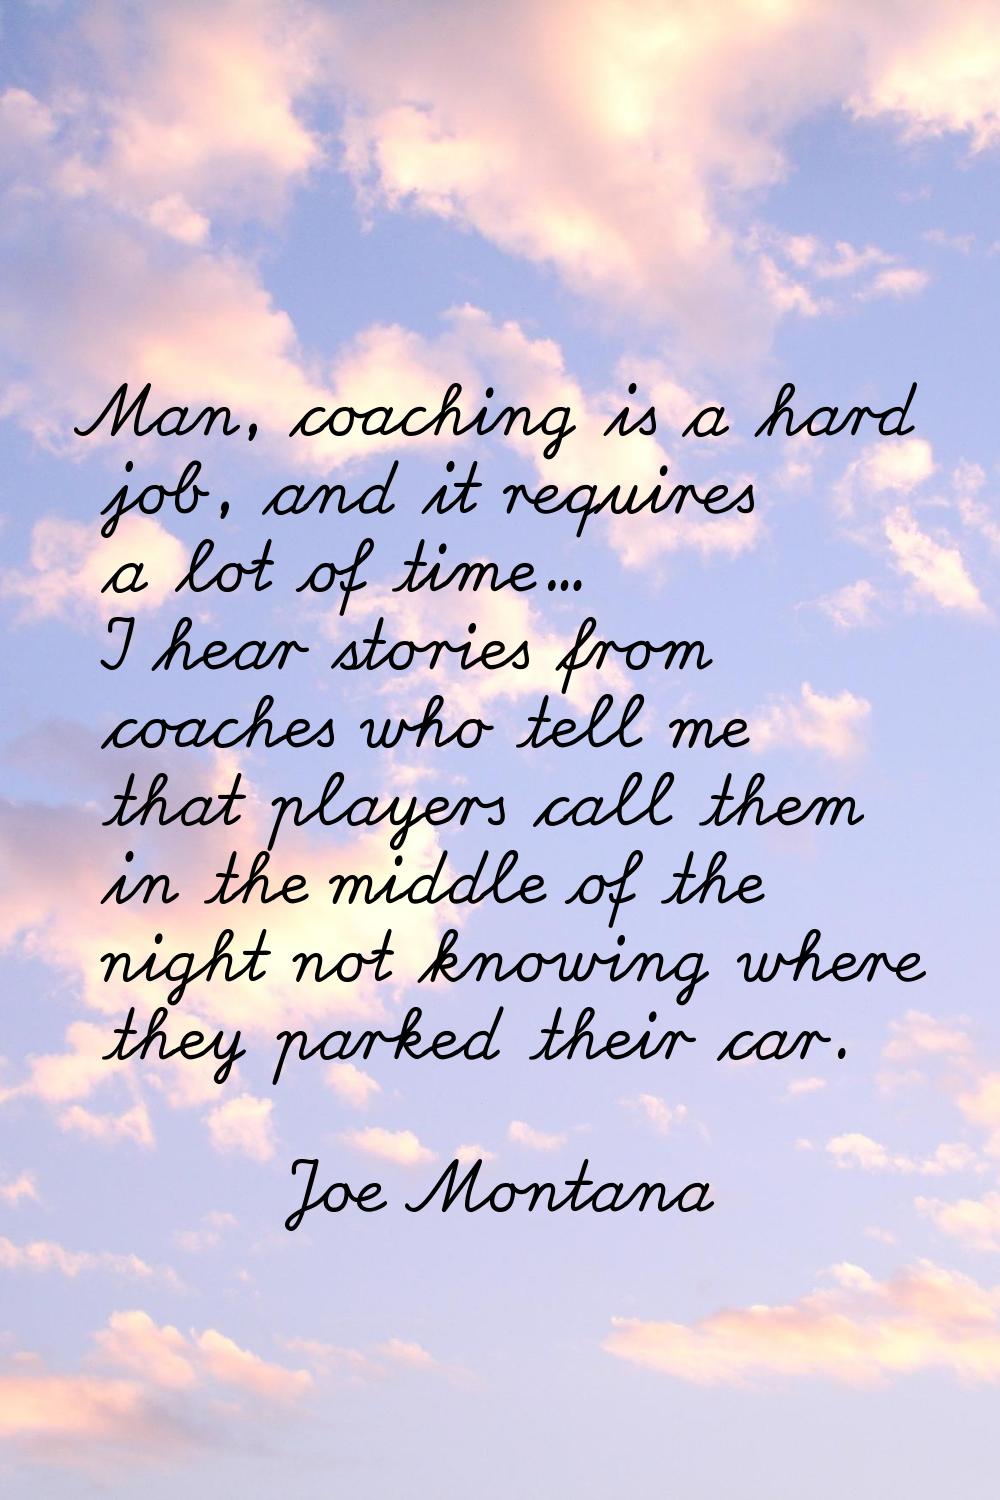 Man, coaching is a hard job, and it requires a lot of time... I hear stories from coaches who tell 